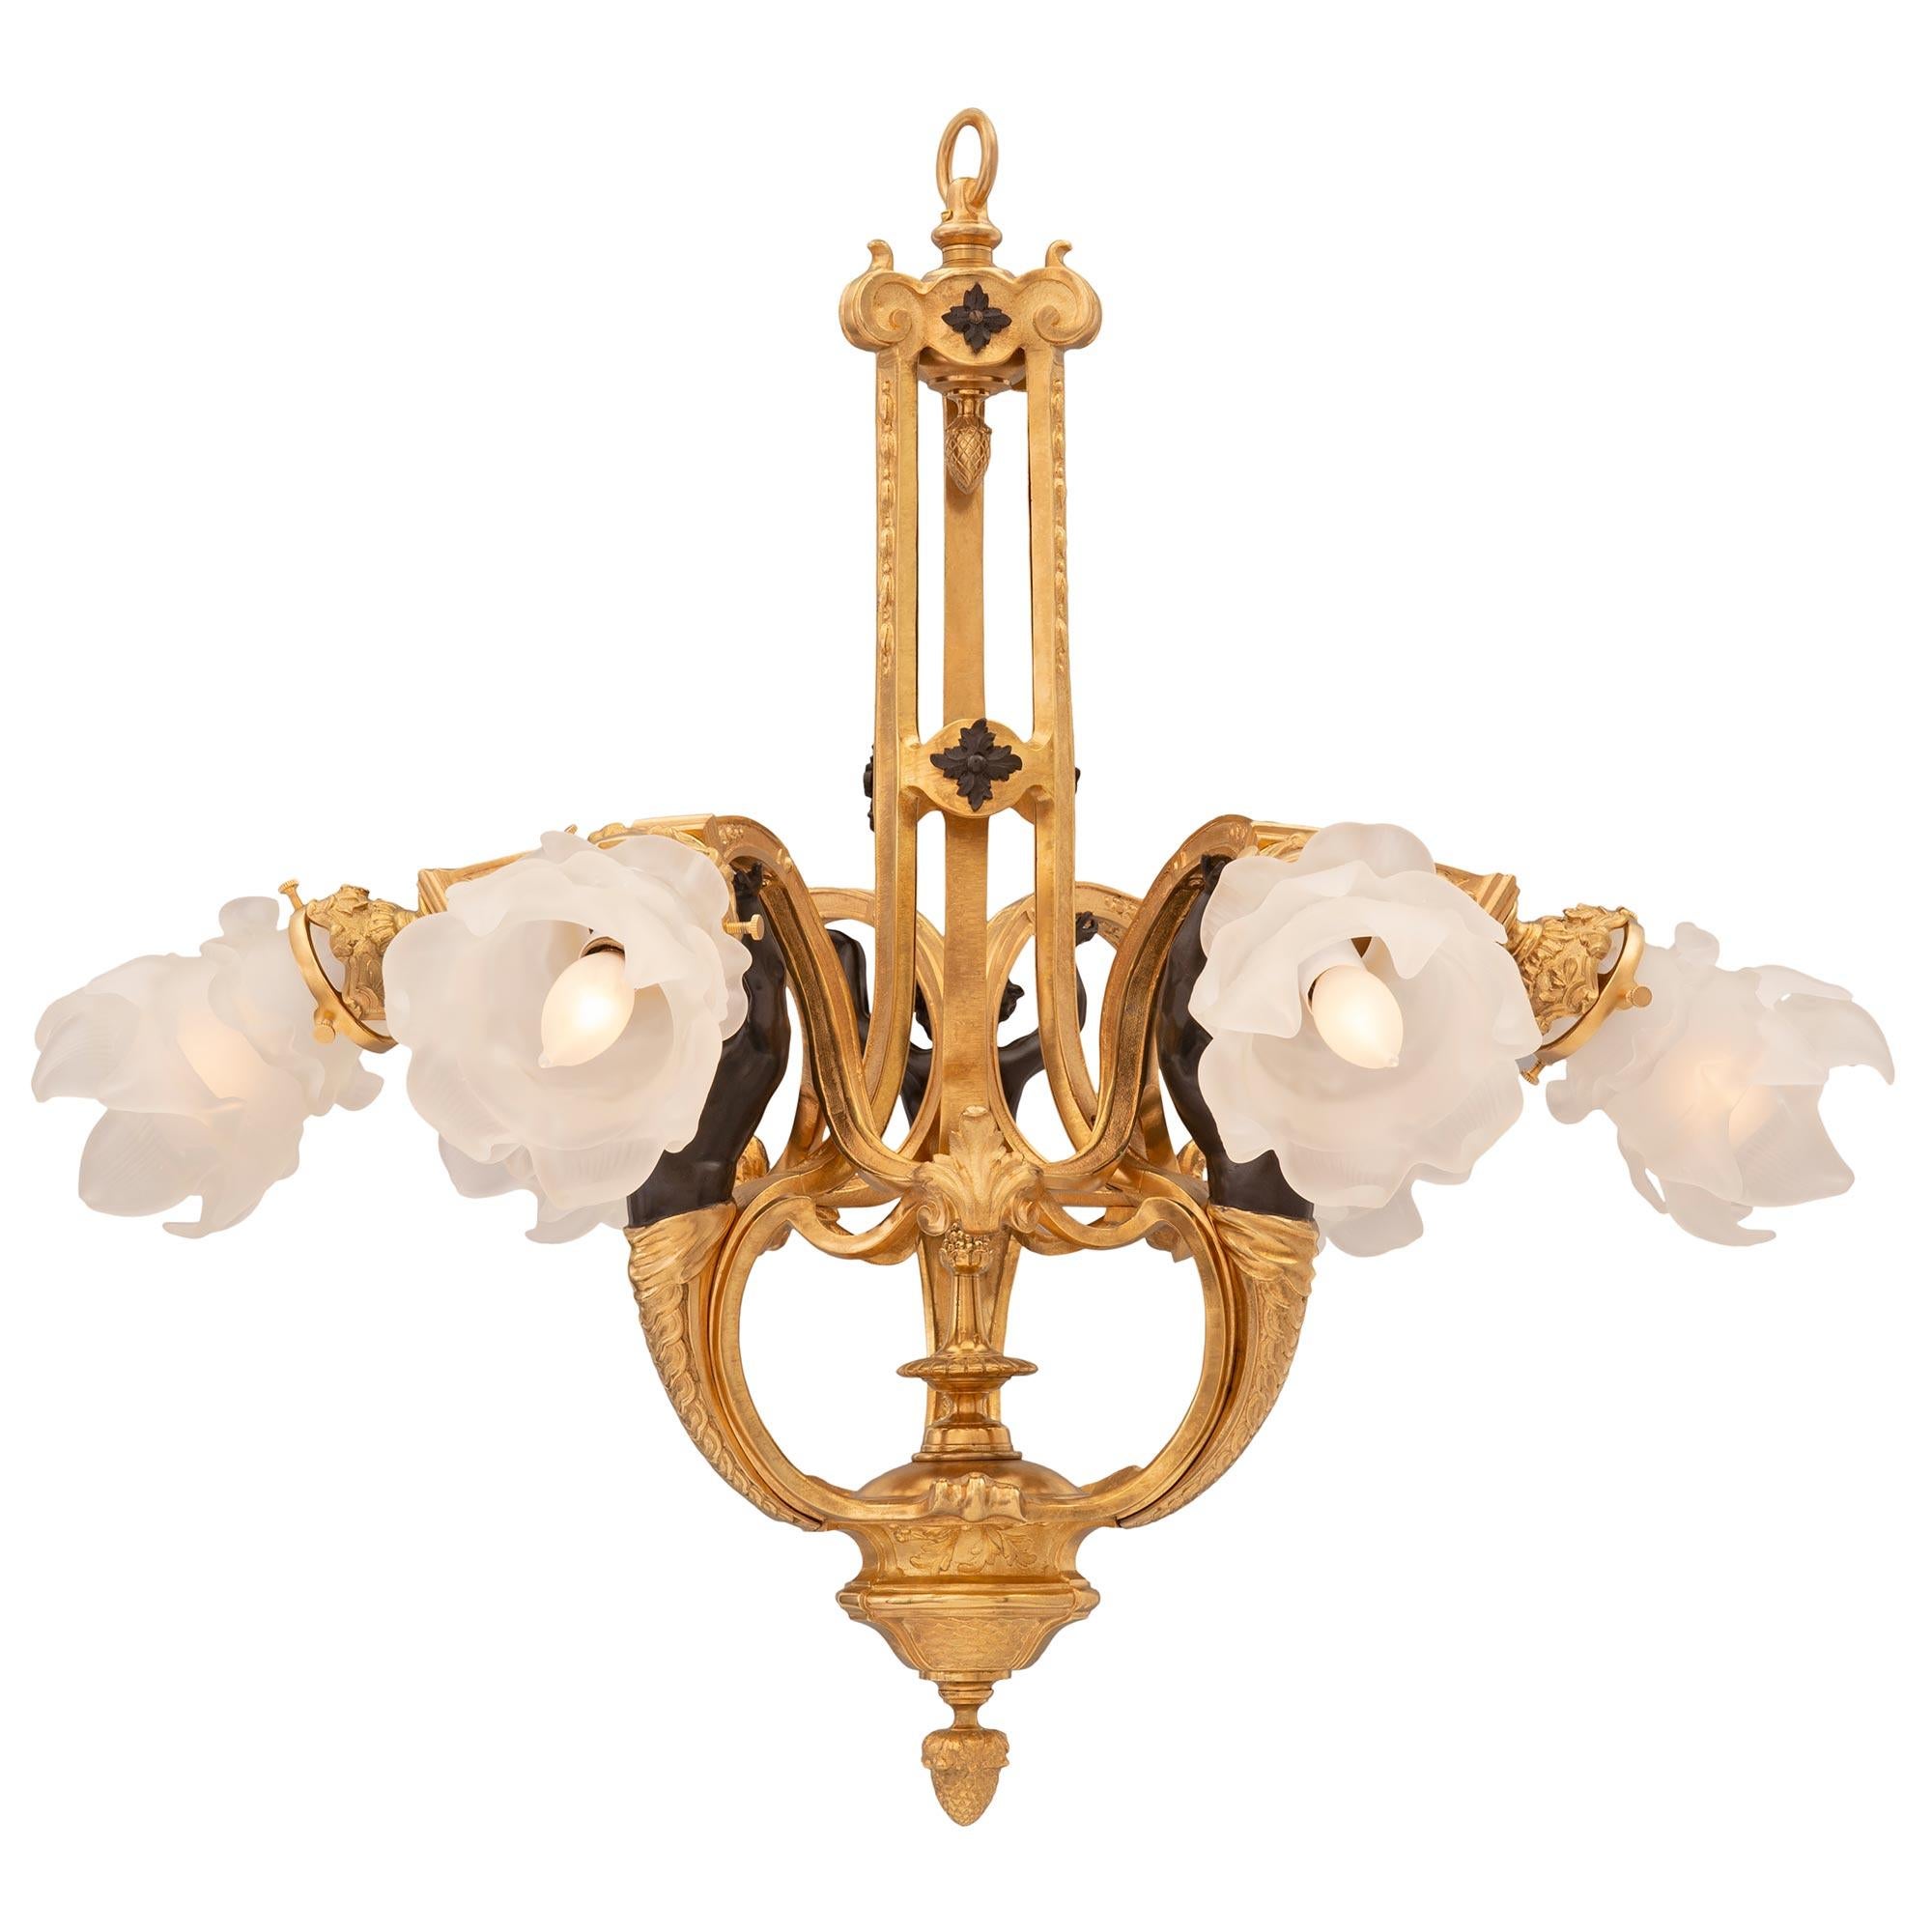 A beautiful and unique French 19th century Louis XVI st. patinated bronze, ormolu, and frosted glass chandelier. The six arm chandelier is centered by a fine bottom acorn finial below lovely fish scale designs leading up to three most decorative